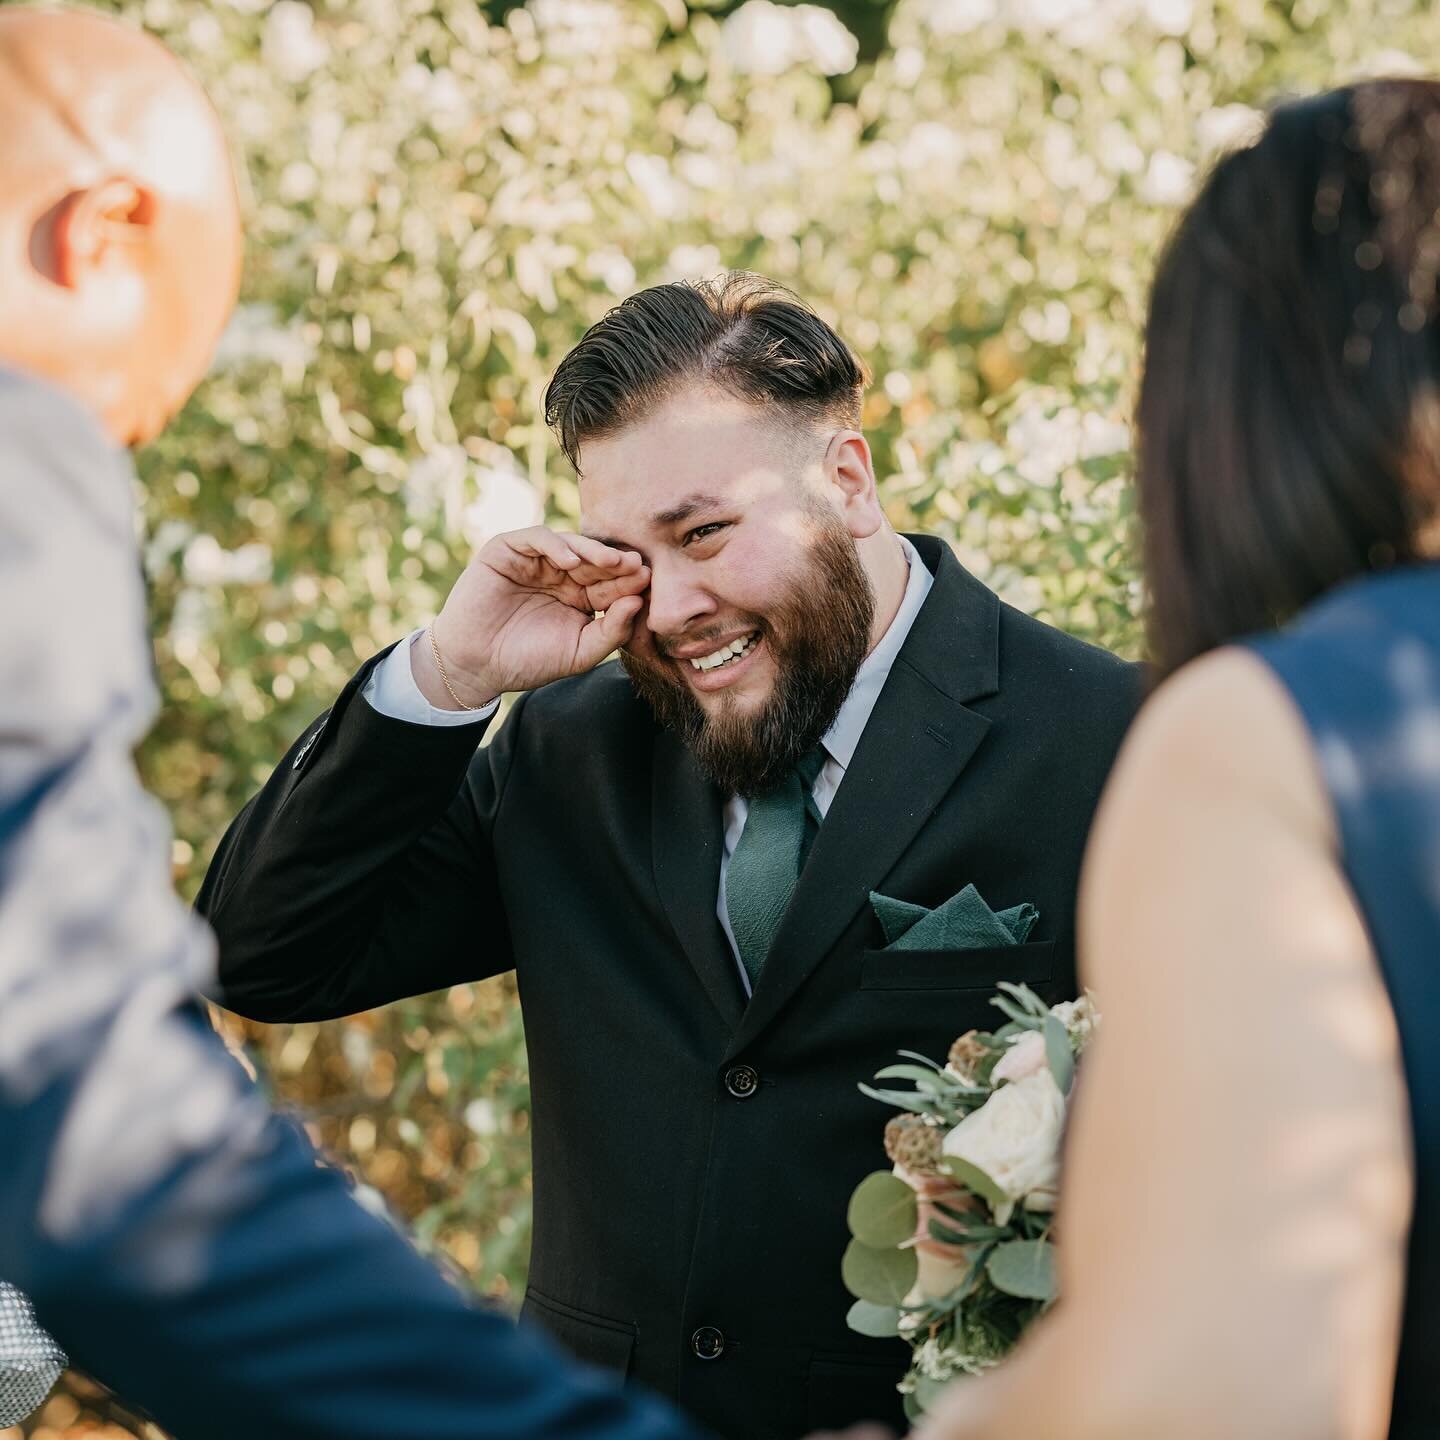 Capturing emotional moments like these are the reasons why I enjoy what I do. Photographed Ricardo &amp; Michelle&rsquo;s wedding a few months ago at the beautiful Knollwood Country Club. From the intimate prayer to the emotional first look to the wo